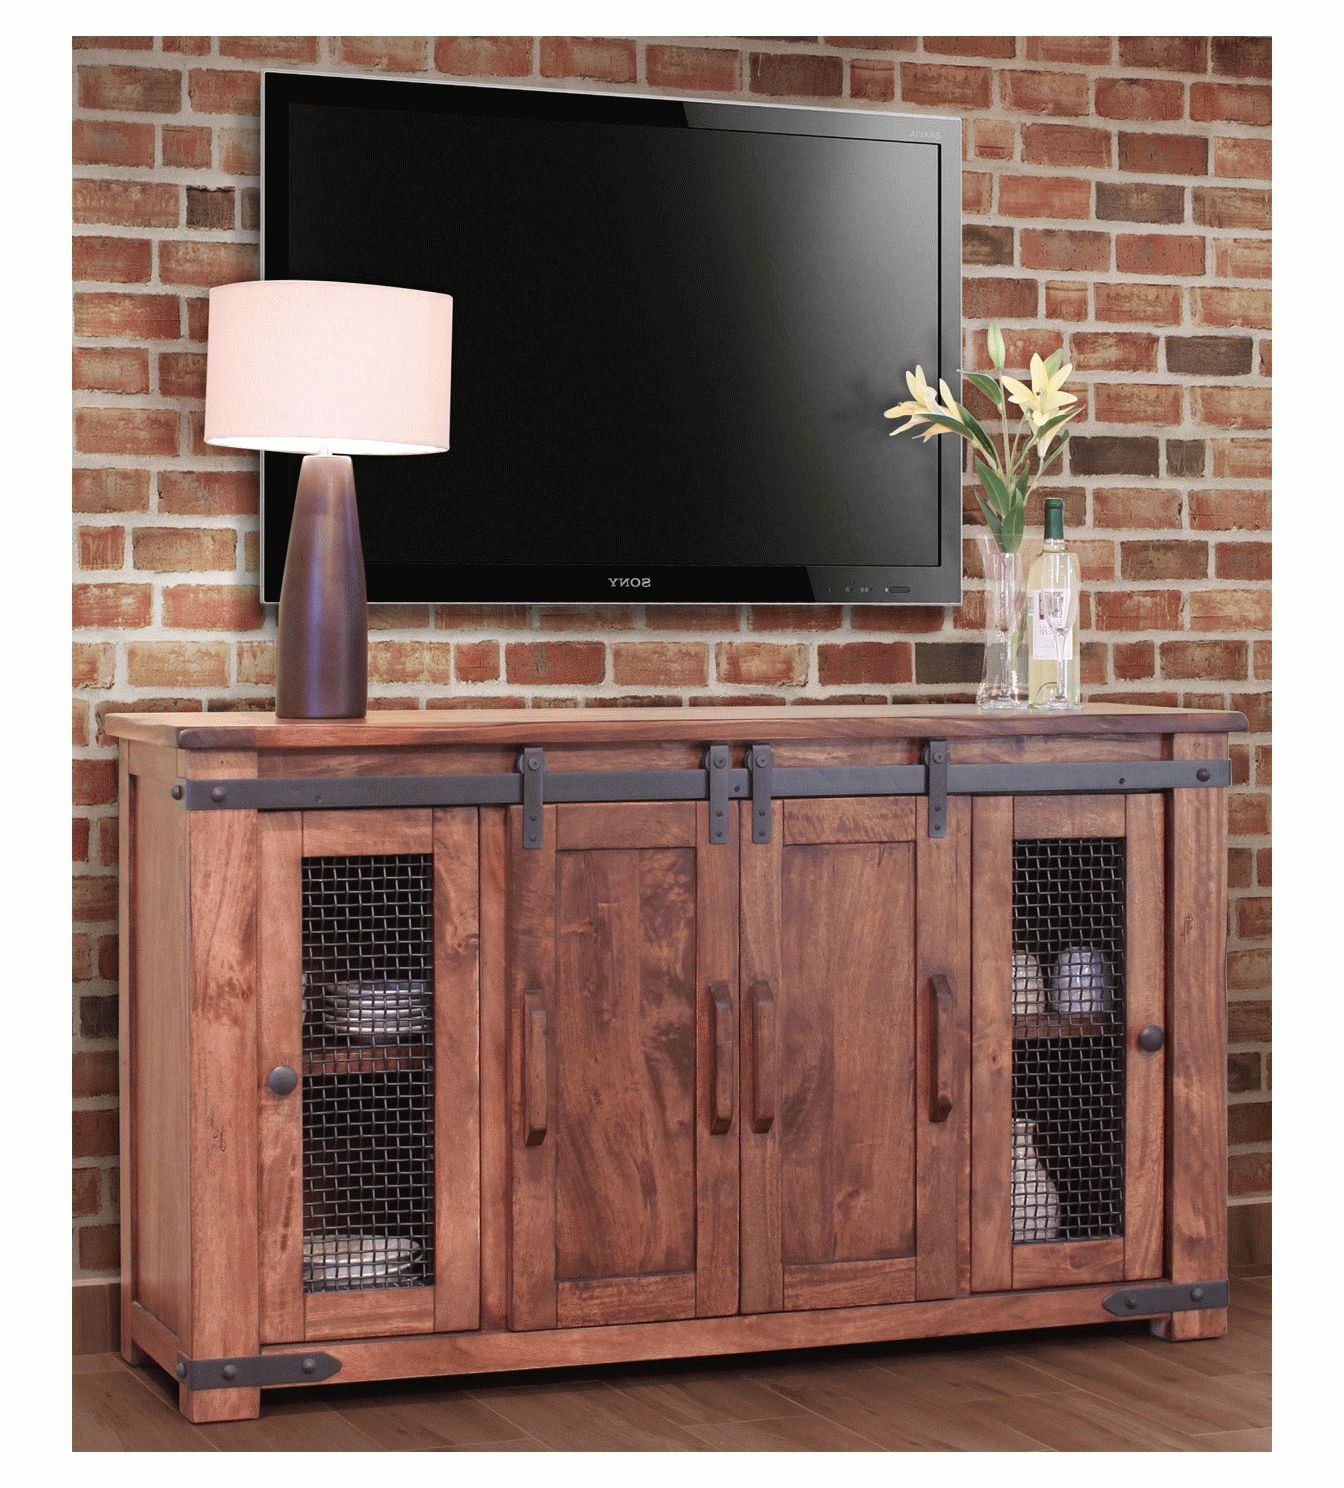 Rustic Barn Door Tv Stand, Barn Door Tv Stand, Barn Door Tv Console Throughout Rustic Pine Tv Cabinets (View 2 of 20)